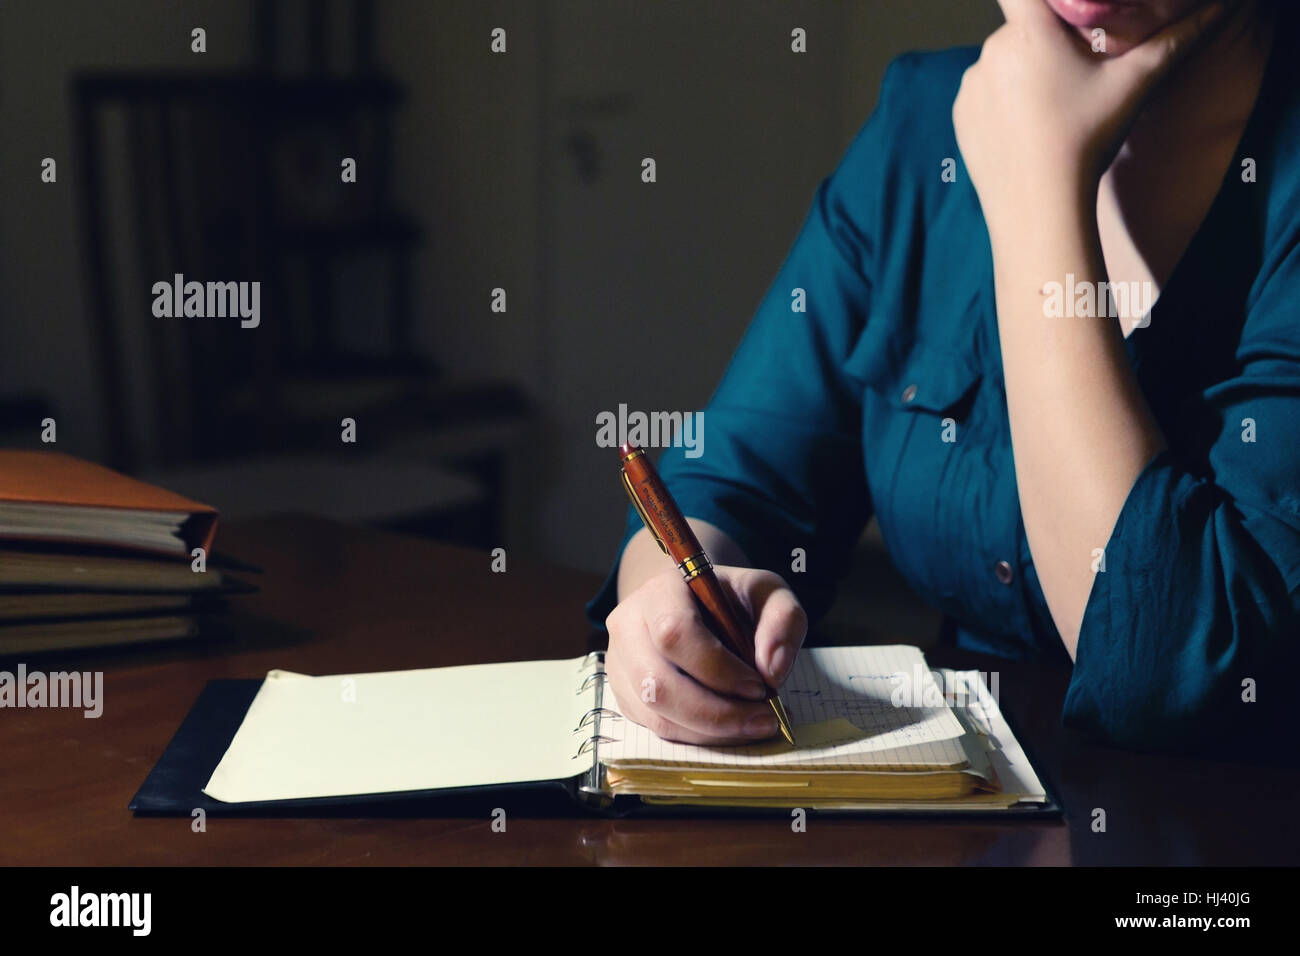 Young lady writing in her notepad late at night Stock Photo